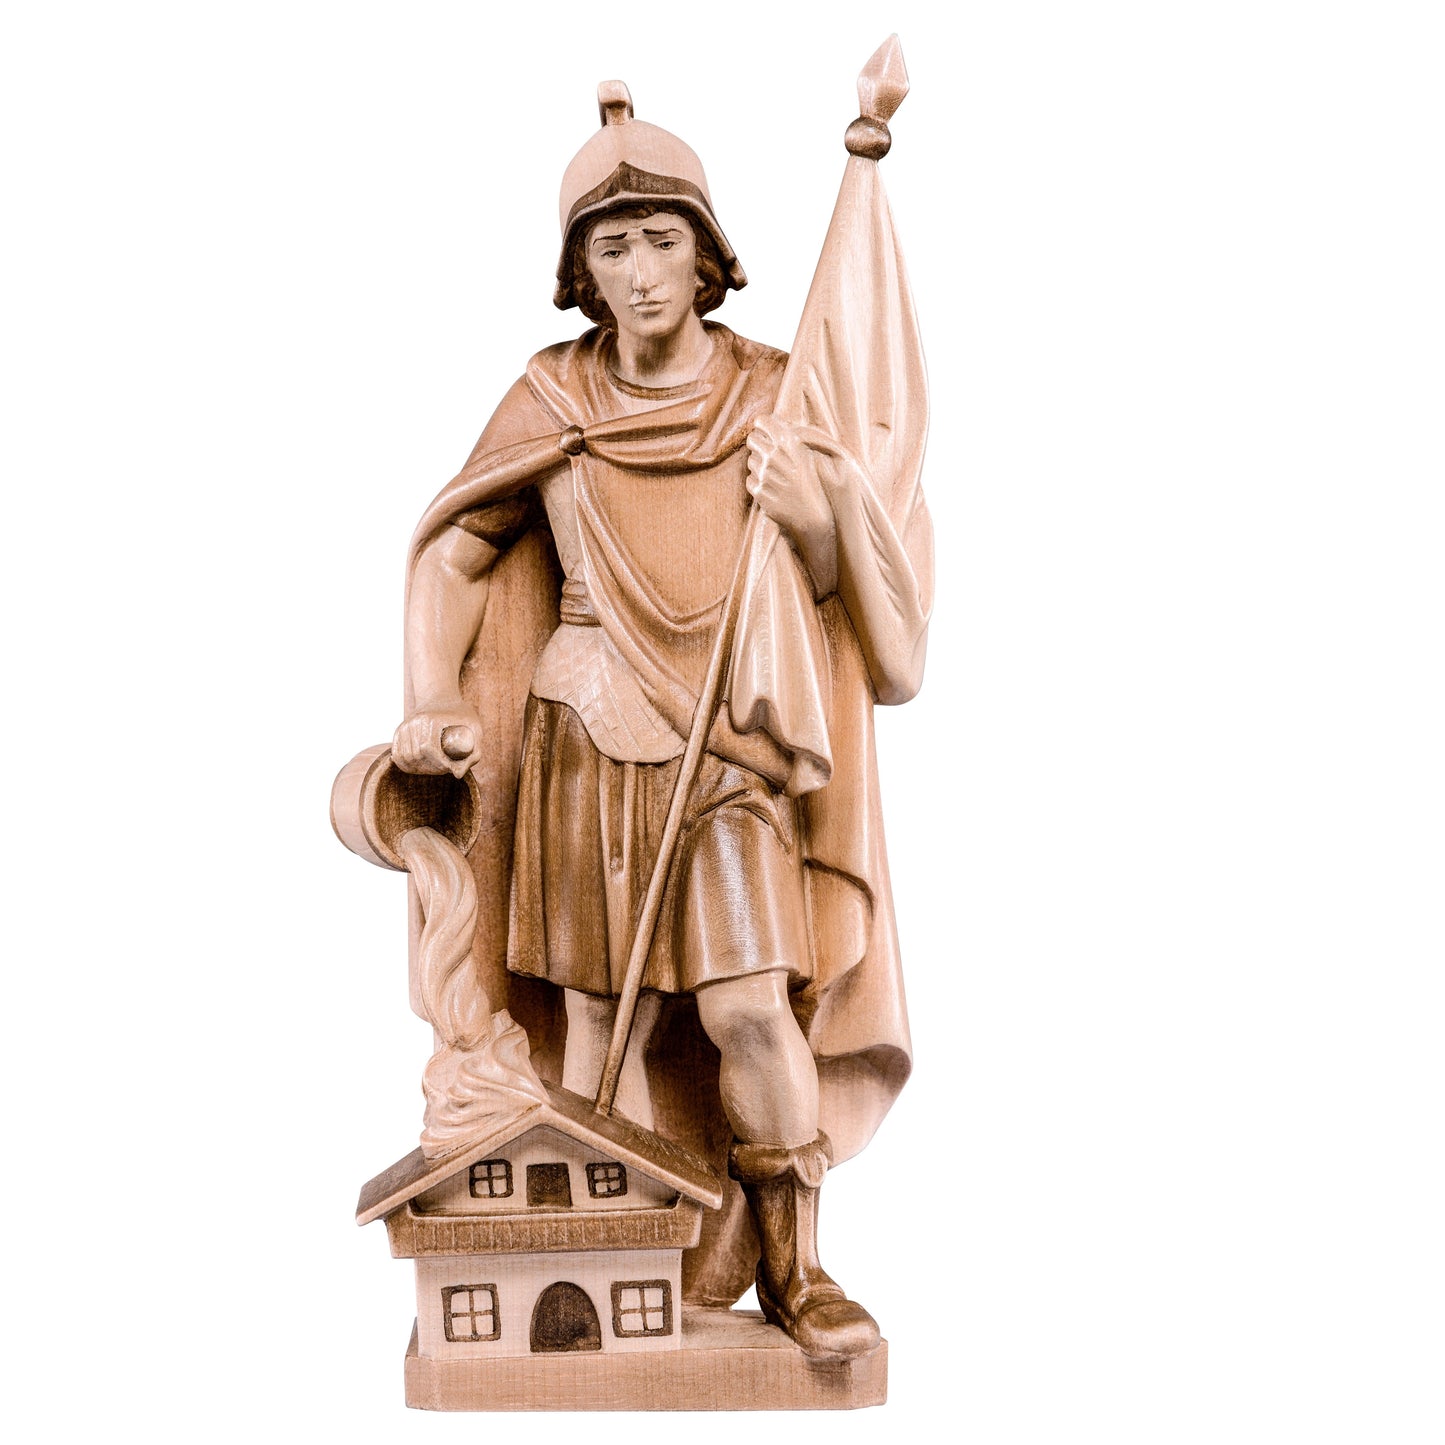 MONDO CATTOLICO Glossy / 13 cm (5.1 in) Wooden Statue of St. Florian Modern Style